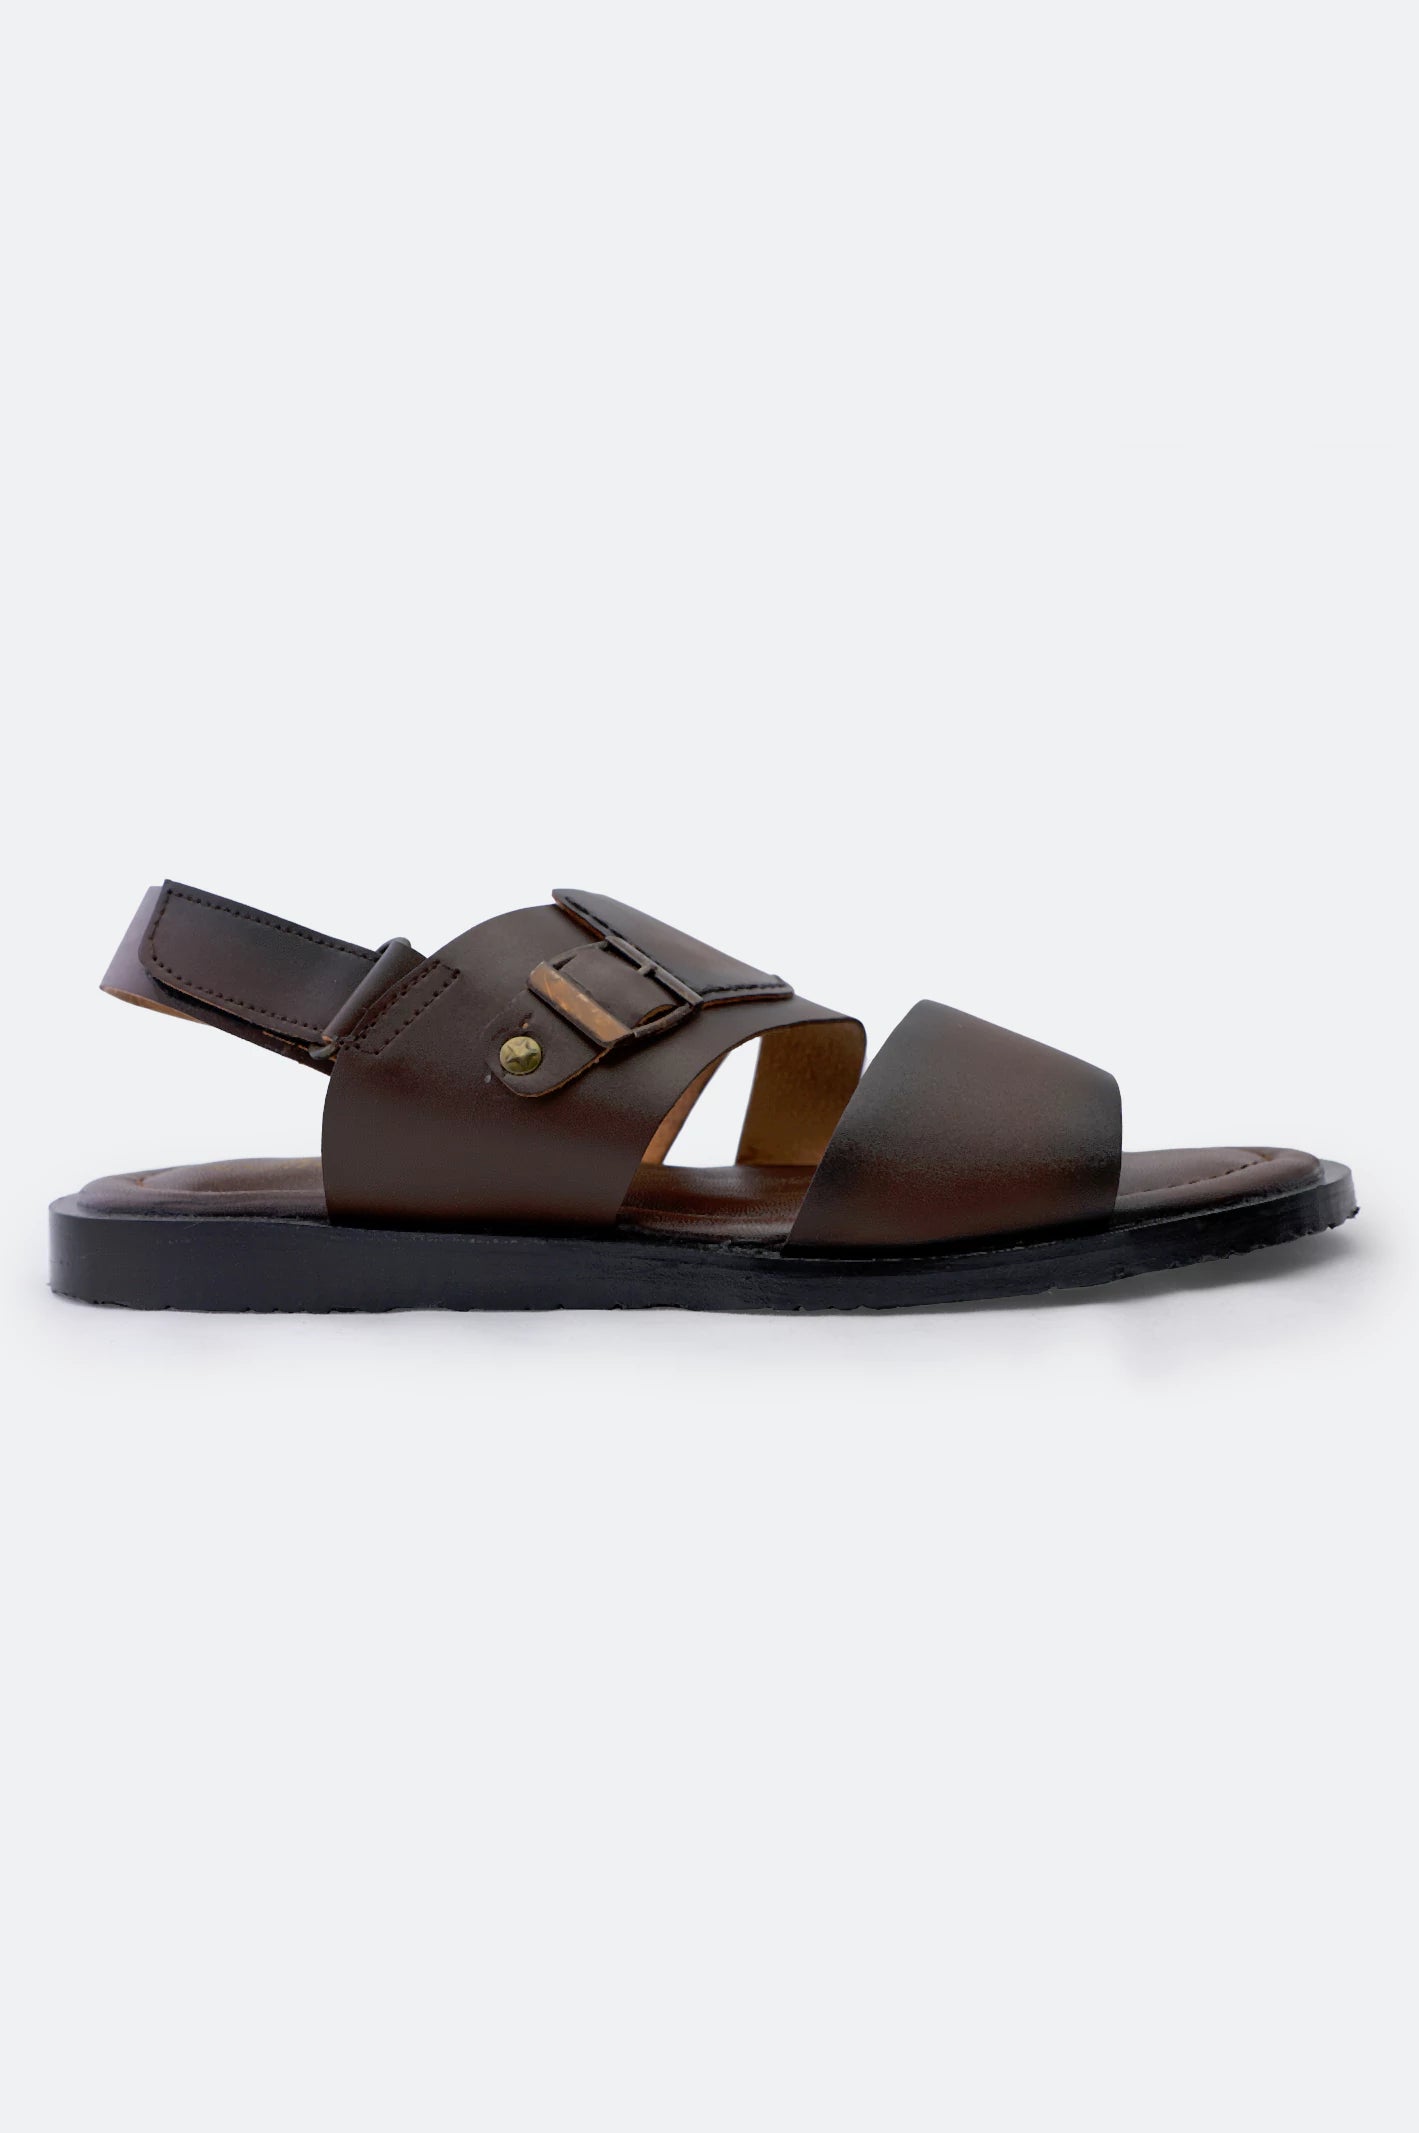 Brown French Emporio Men's Sandals From French Emporio By Diners